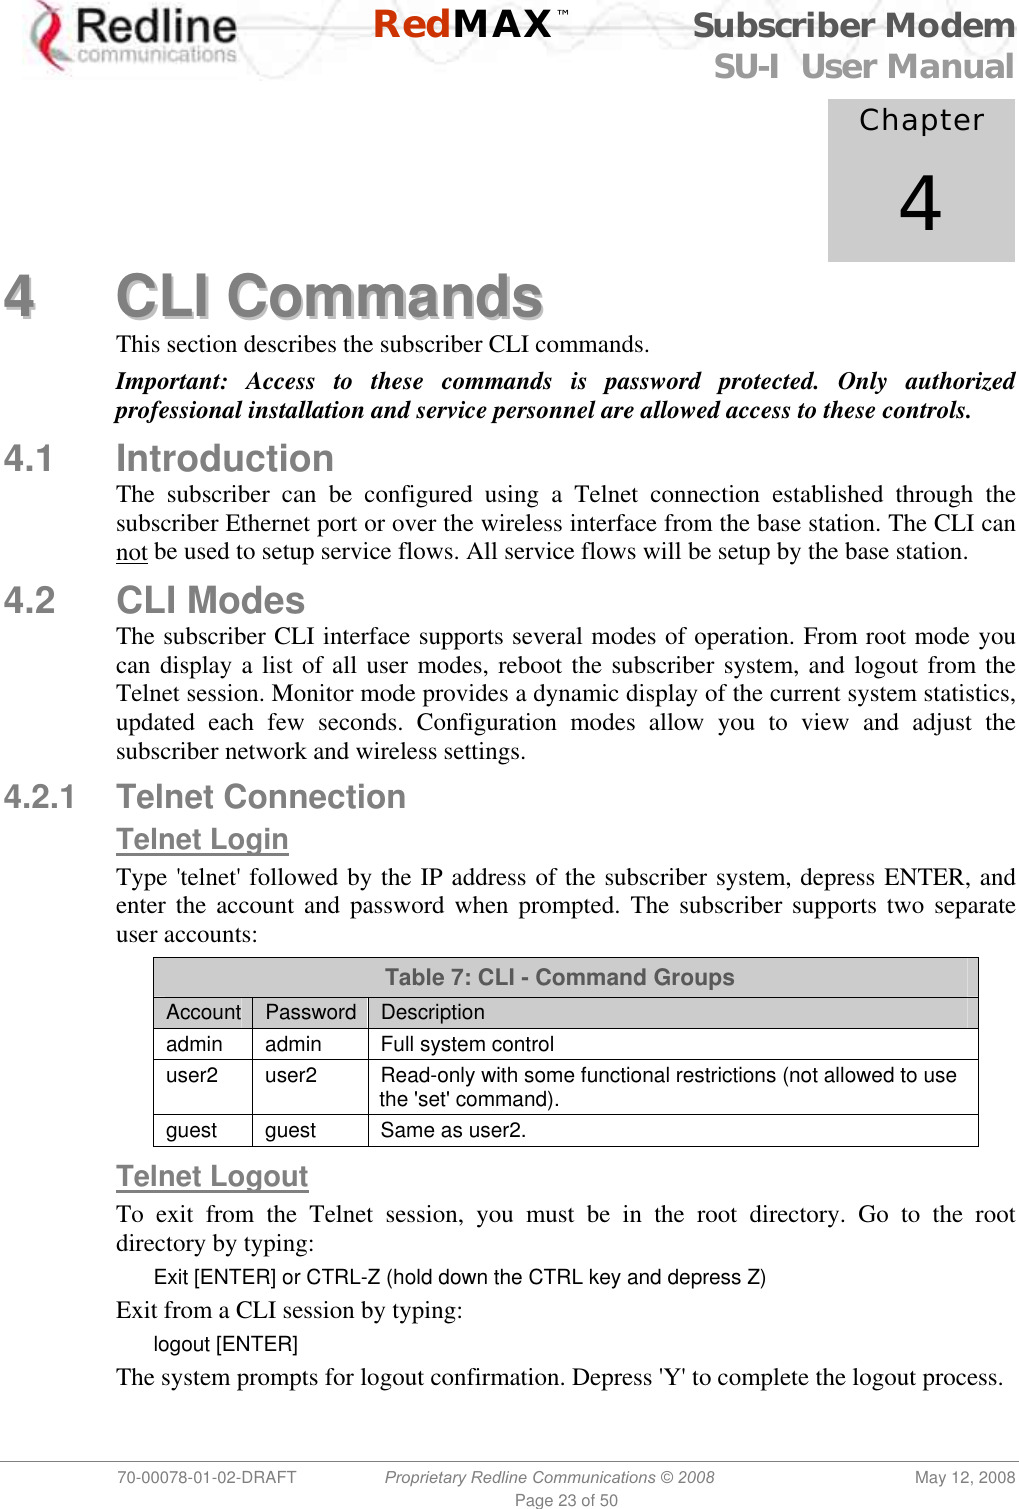    RedMAX™ Subscriber Modem SU-I  User Manual  70-00078-01-02-DRAFT  Proprietary Redline Communications © 2008  May 12, 2008 Page 23 of 50            Chapter 4 44  CCLLII  CCoommmmaannddss  This section describes the subscriber CLI commands. Important: Access to these commands is password protected. Only authorized professional installation and service personnel are allowed access to these controls. 4.1 Introduction The subscriber can be configured using a Telnet connection established through the subscriber Ethernet port or over the wireless interface from the base station. The CLI can not be used to setup service flows. All service flows will be setup by the base station. 4.2 CLI Modes The subscriber CLI interface supports several modes of operation. From root mode you can display a list of all user modes, reboot the subscriber system, and logout from the Telnet session. Monitor mode provides a dynamic display of the current system statistics, updated each few seconds. Configuration modes allow you to view and adjust the subscriber network and wireless settings. 4.2.1 Telnet Connection Telnet Login Type &apos;telnet&apos; followed by the IP address of the subscriber system, depress ENTER, and enter the account and password when prompted. The subscriber supports two separate user accounts: Table 7: CLI - Command Groups Account  Password  Description admin admin  Full system control user2  user2  Read-only with some functional restrictions (not allowed to use the &apos;set&apos; command). guest  guest  Same as user2.  Telnet Logout To exit from the Telnet session, you must be in the root directory. Go to the root directory by typing: Exit [ENTER] or CTRL-Z (hold down the CTRL key and depress Z) Exit from a CLI session by typing: logout [ENTER] The system prompts for logout confirmation. Depress &apos;Y&apos; to complete the logout process. 